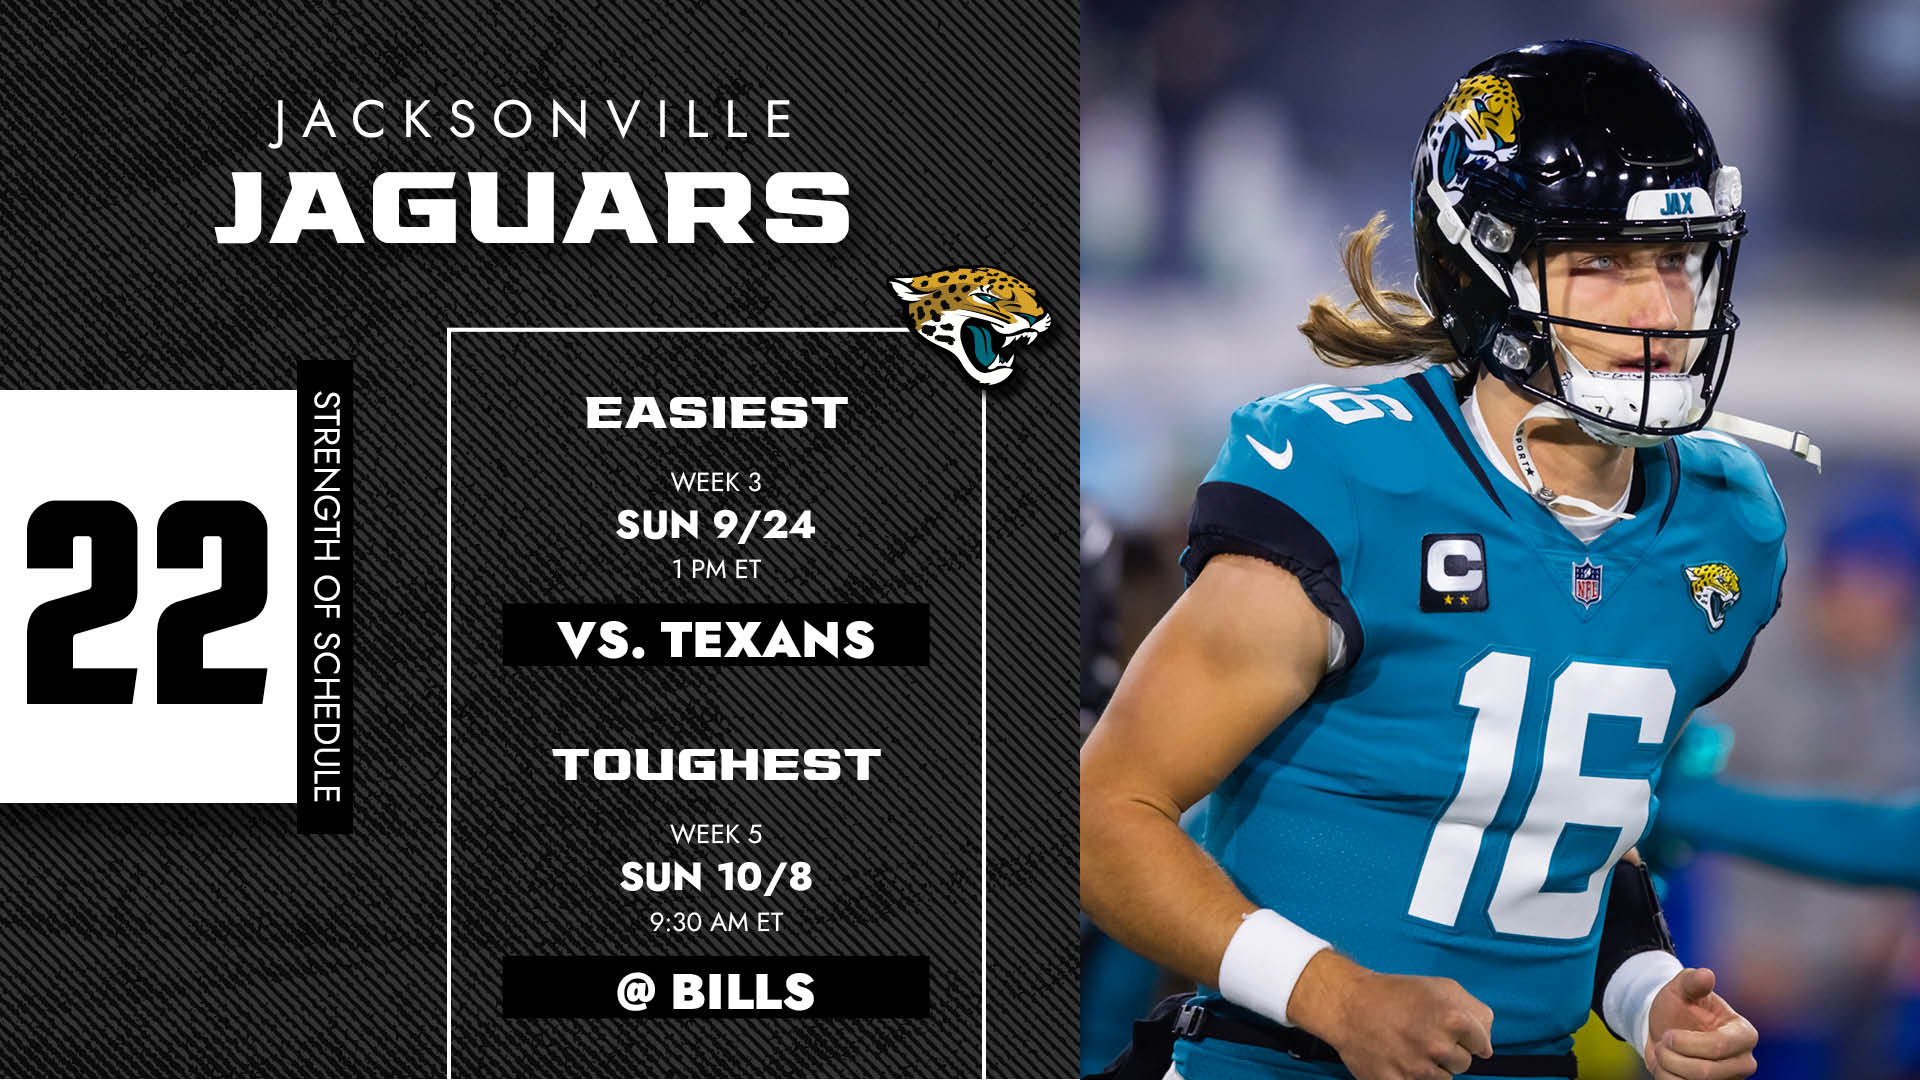 jags game this sunday